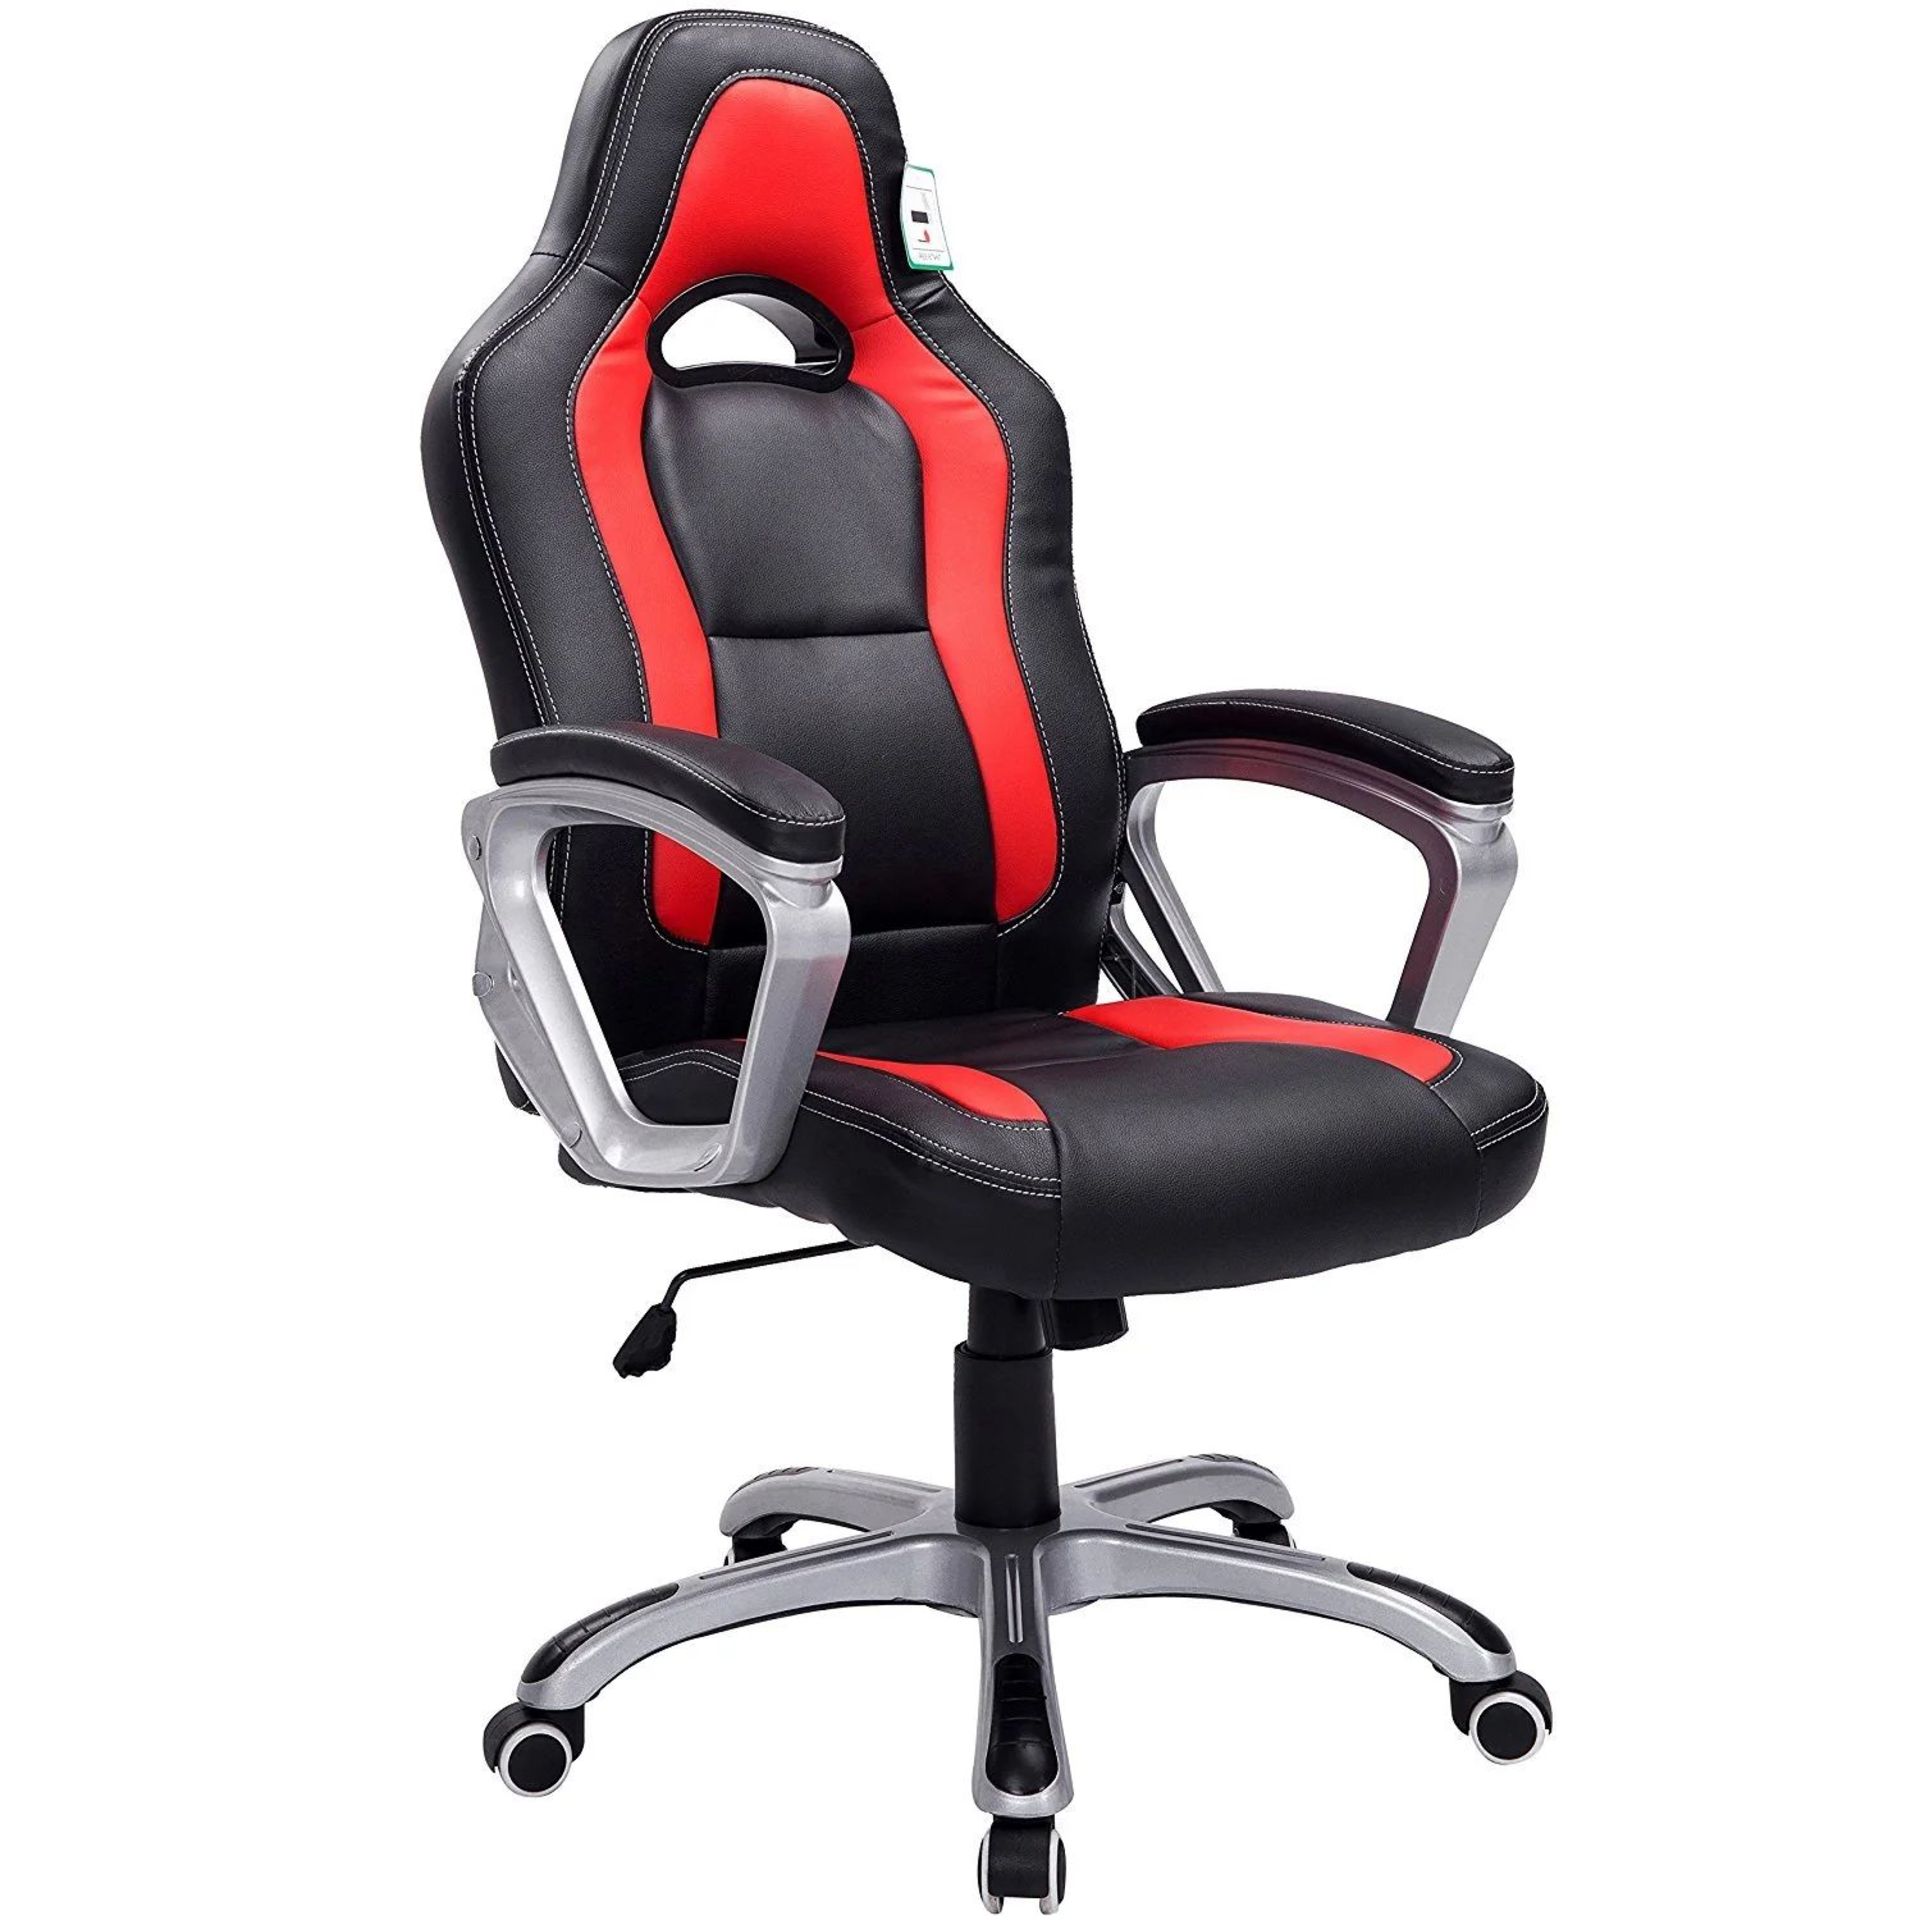 DaAls Gaming Chair Racing Sport Style Swivel Office Chair in Black & Red. - R14. RRP £149.00.